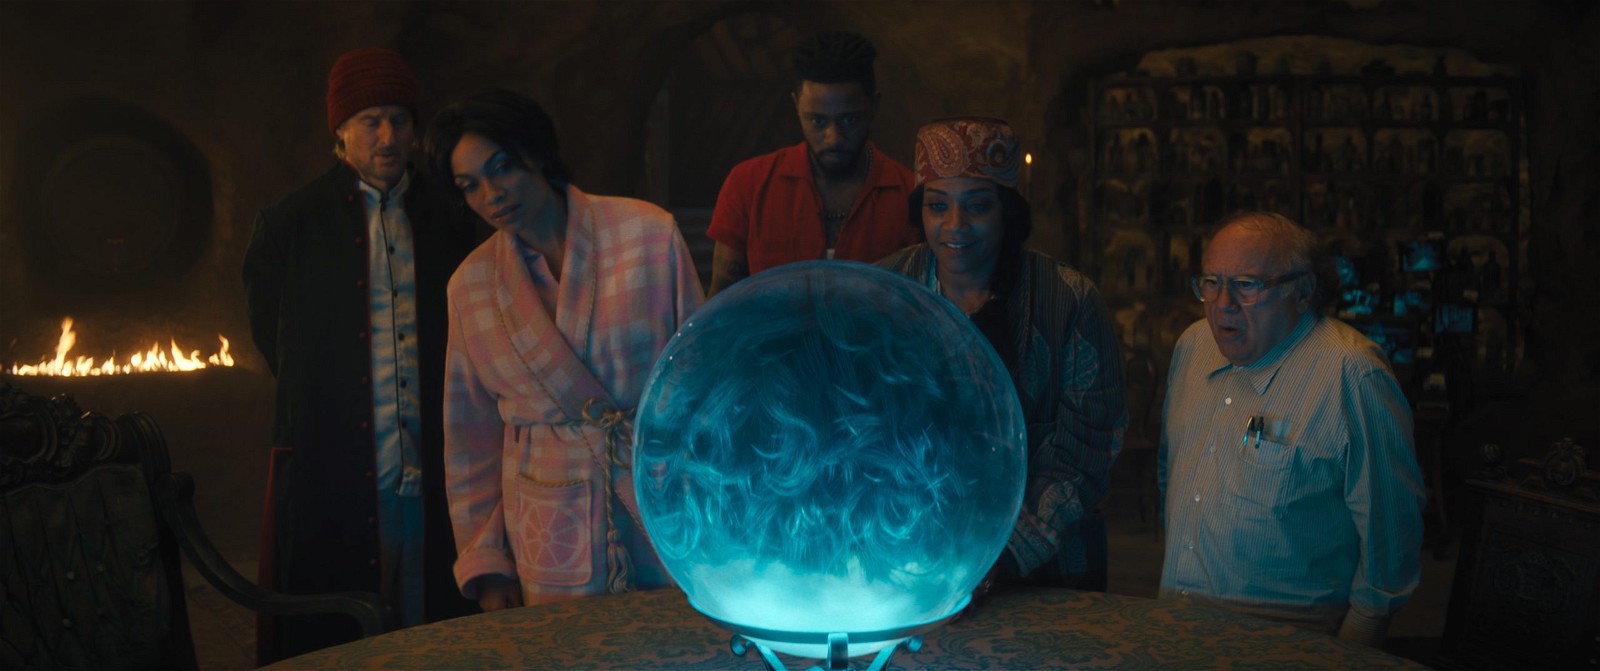 (L to R) Owen Wilson as Father Kent, Rosario Dawson as Gabbie, LaKeith Stanfield as Ben, Tiffany Haddish as Harriet, and Danny DeVito as Professor Bruce Davis in Haunted Mansion